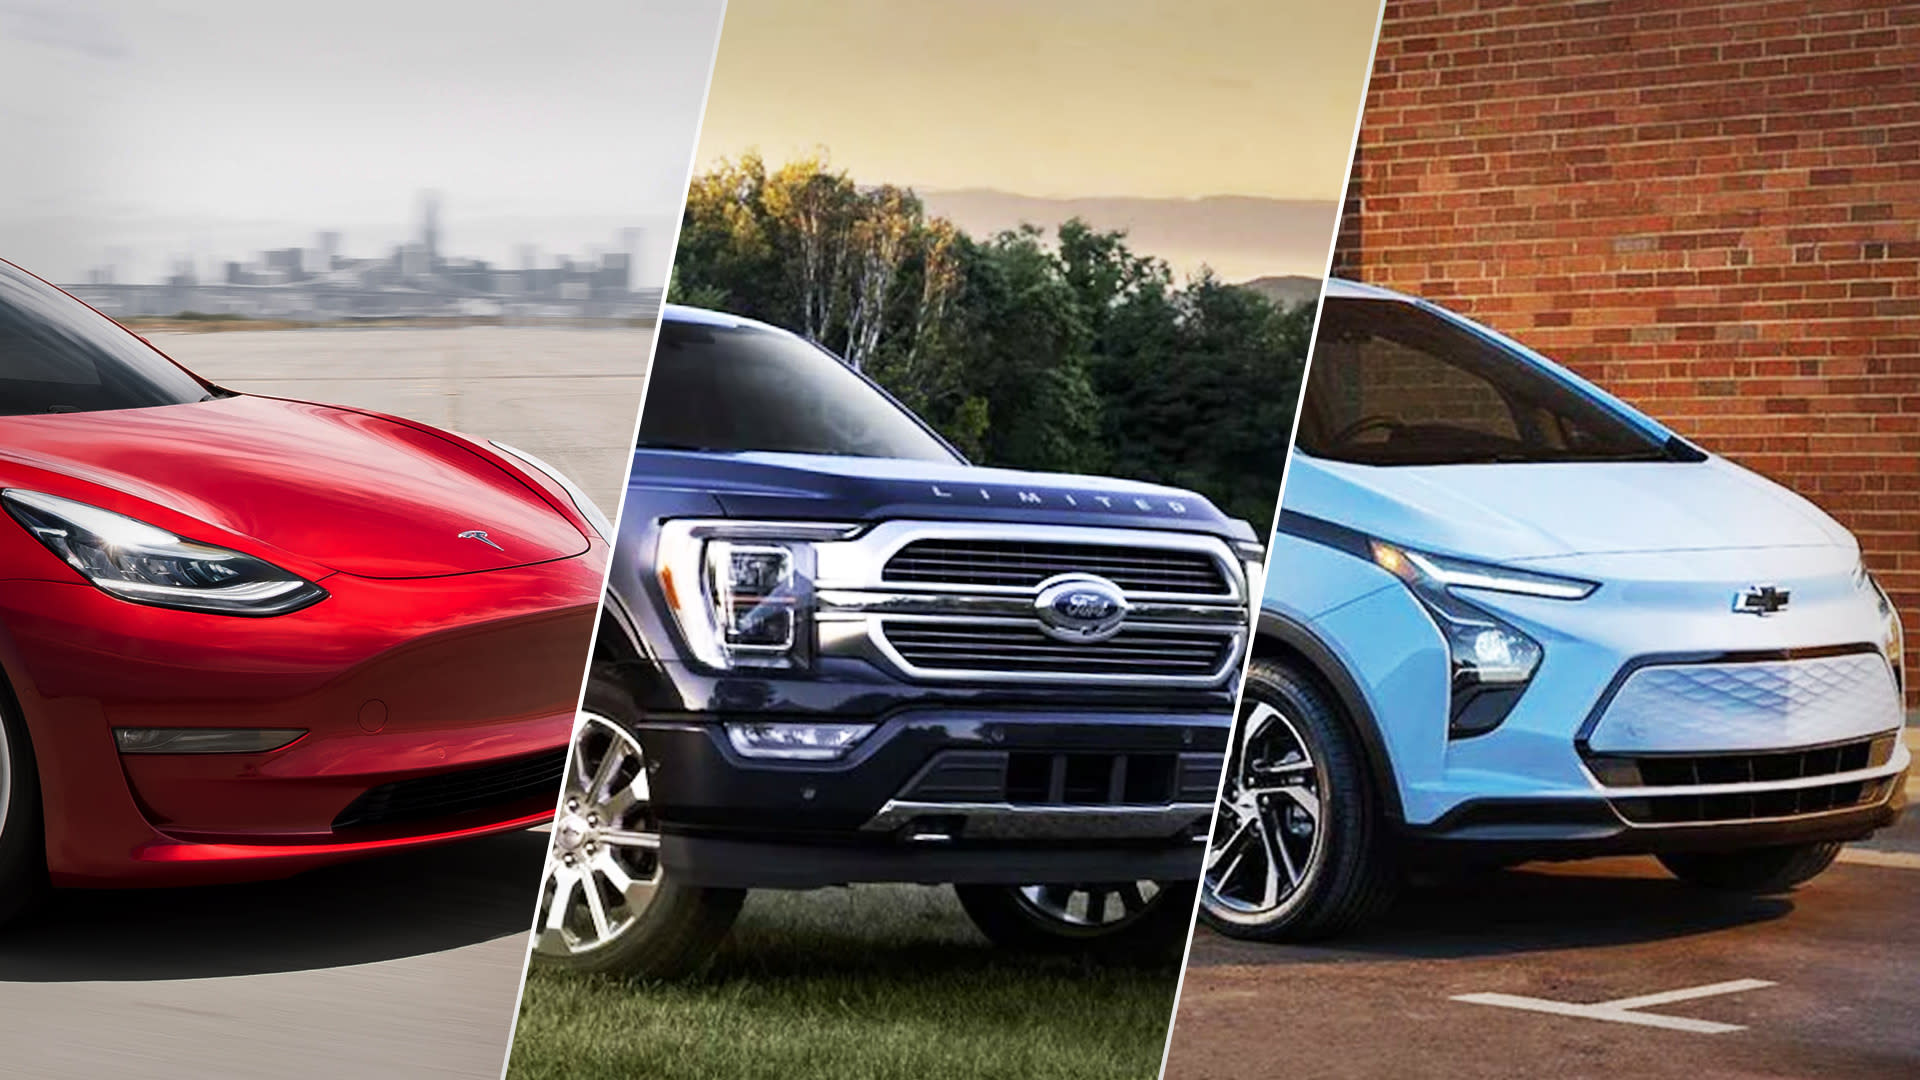 Ford, GM Downgraded; Here's Where They Have Support